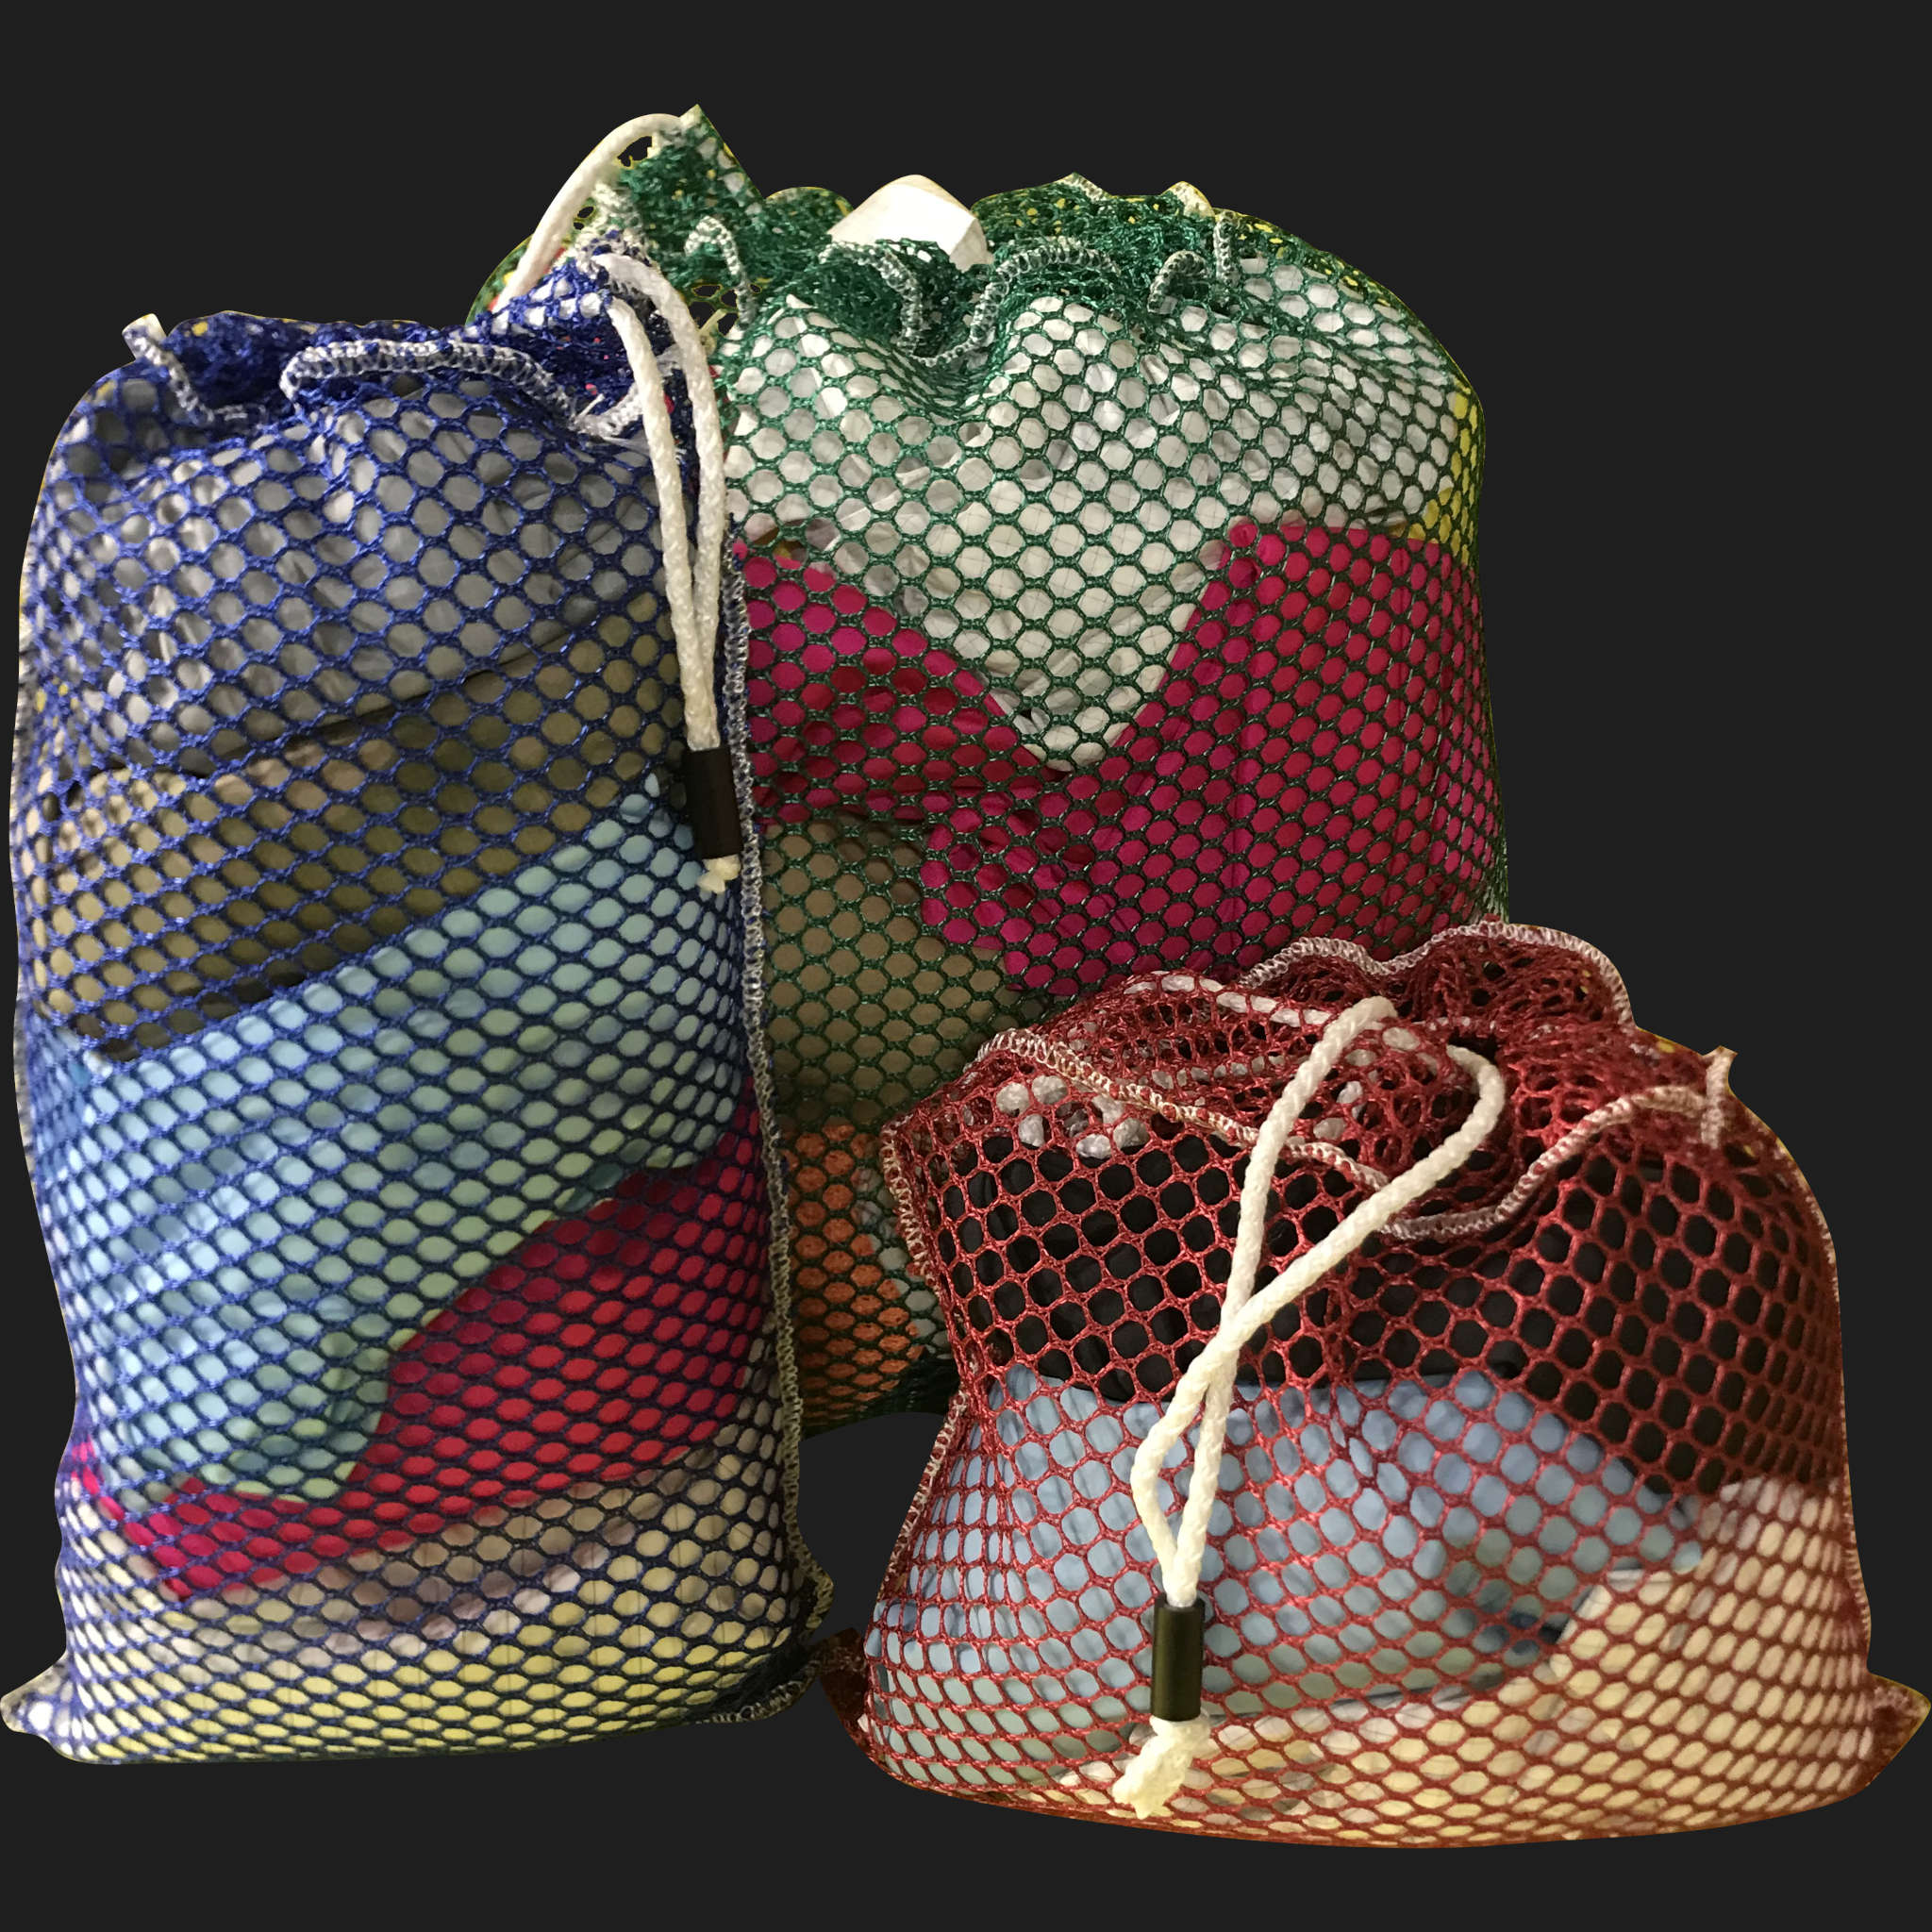 52" x 74" Customized Mesh-Net-Laundry Bags Heavy Duty with Cord and barrellock closure